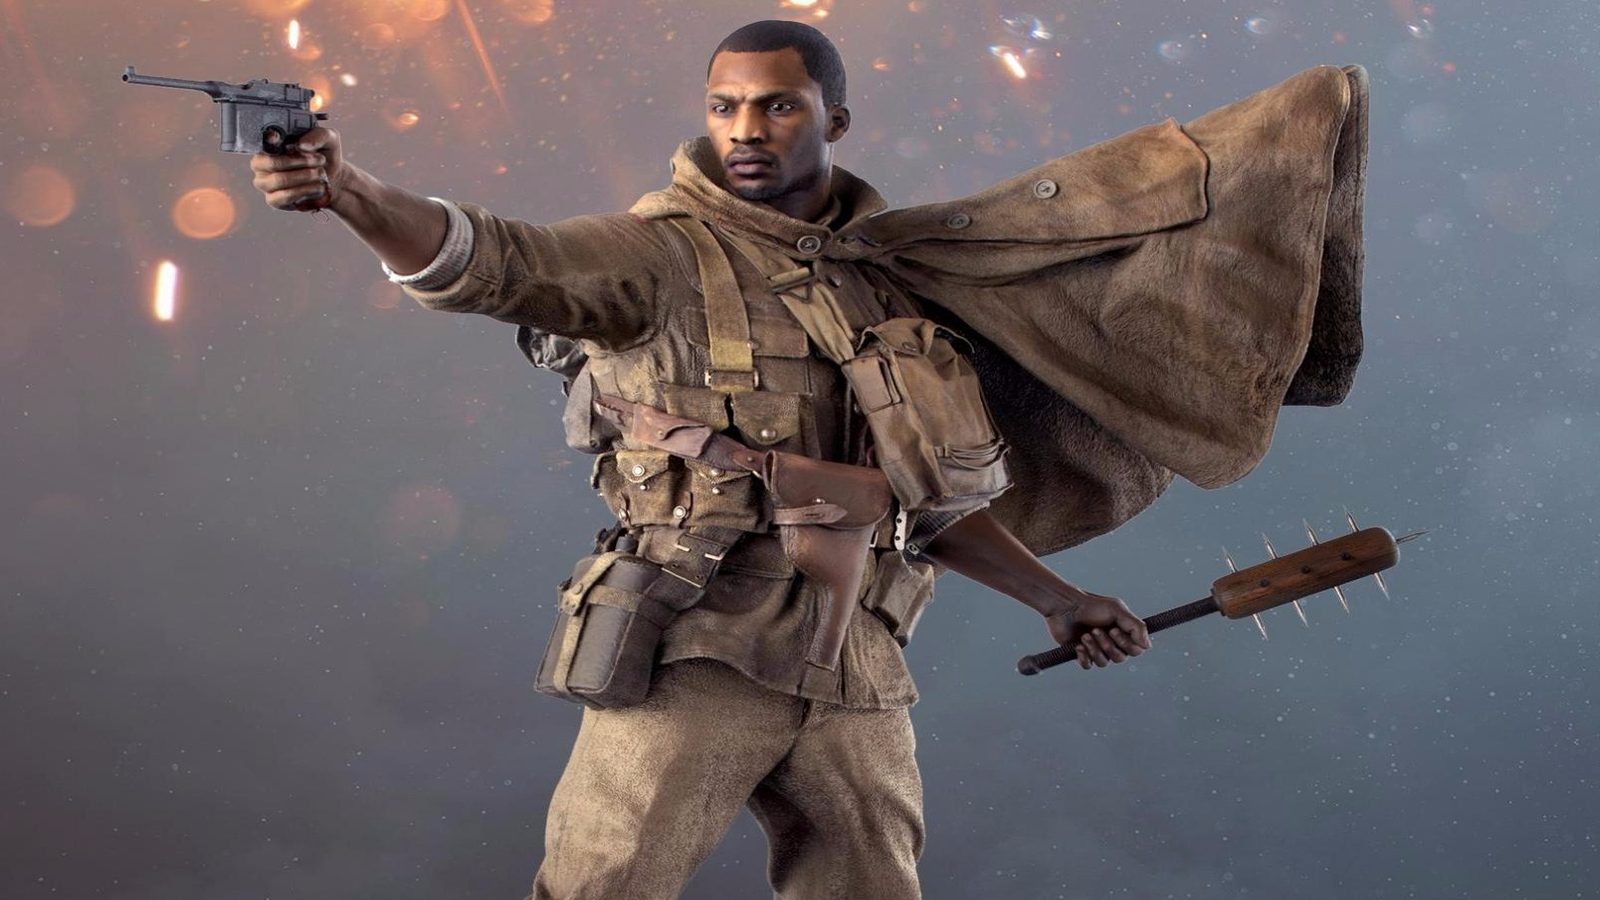 Battlefield 1 is excellent because the series has stopped trying to be Call  of Duty - The Verge